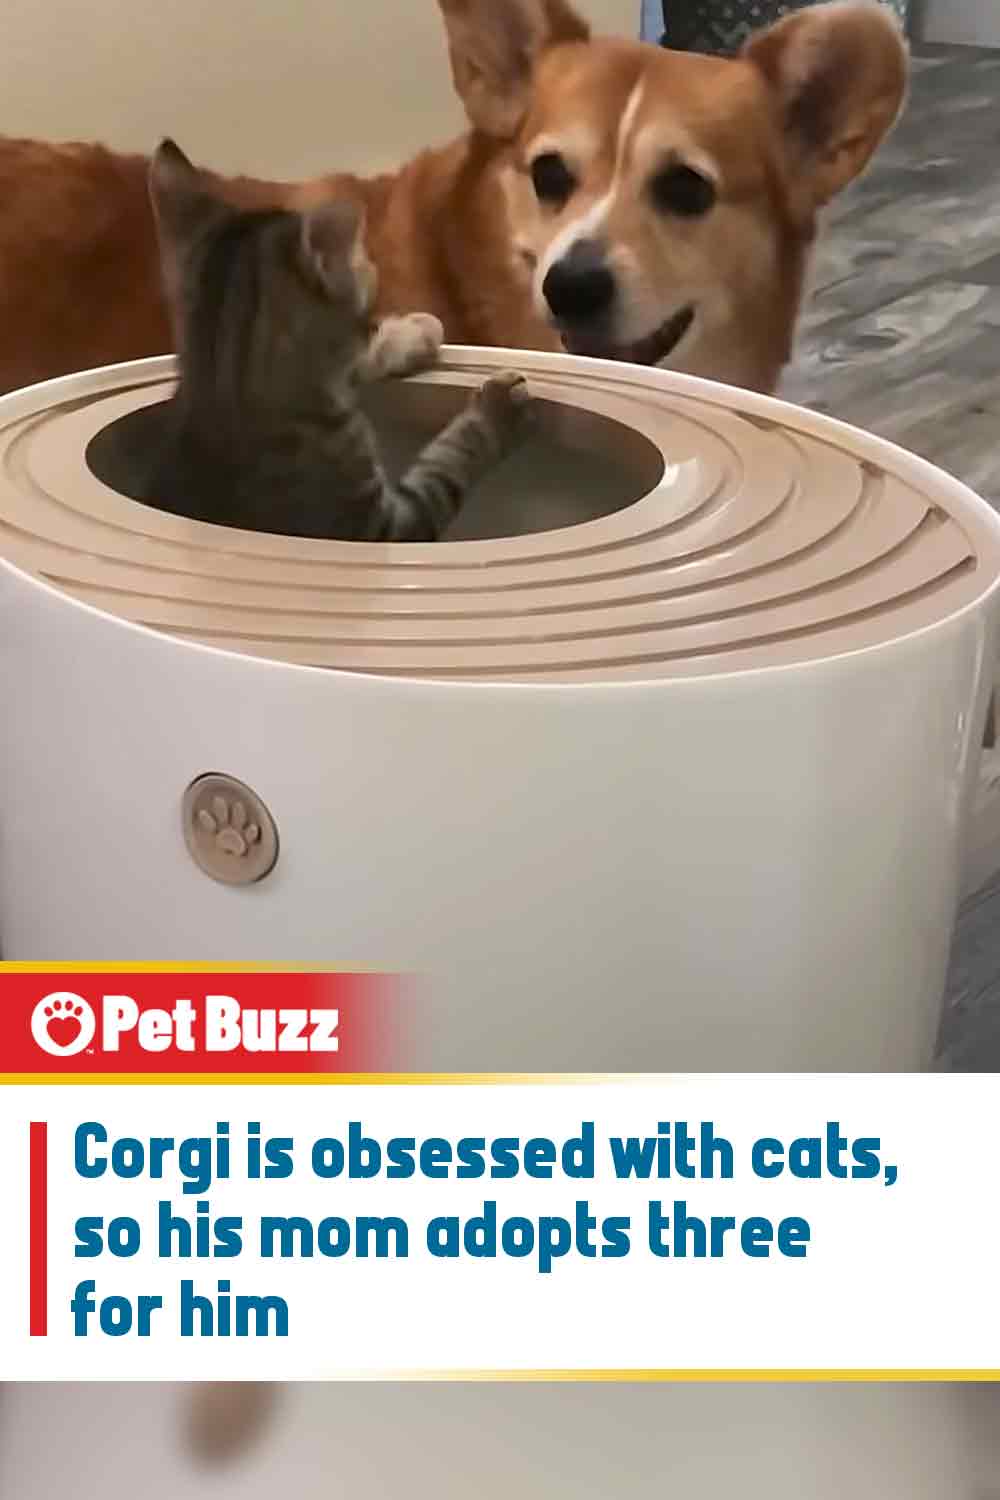 Corgi is obsessed with cats, so his mom adopts three for him